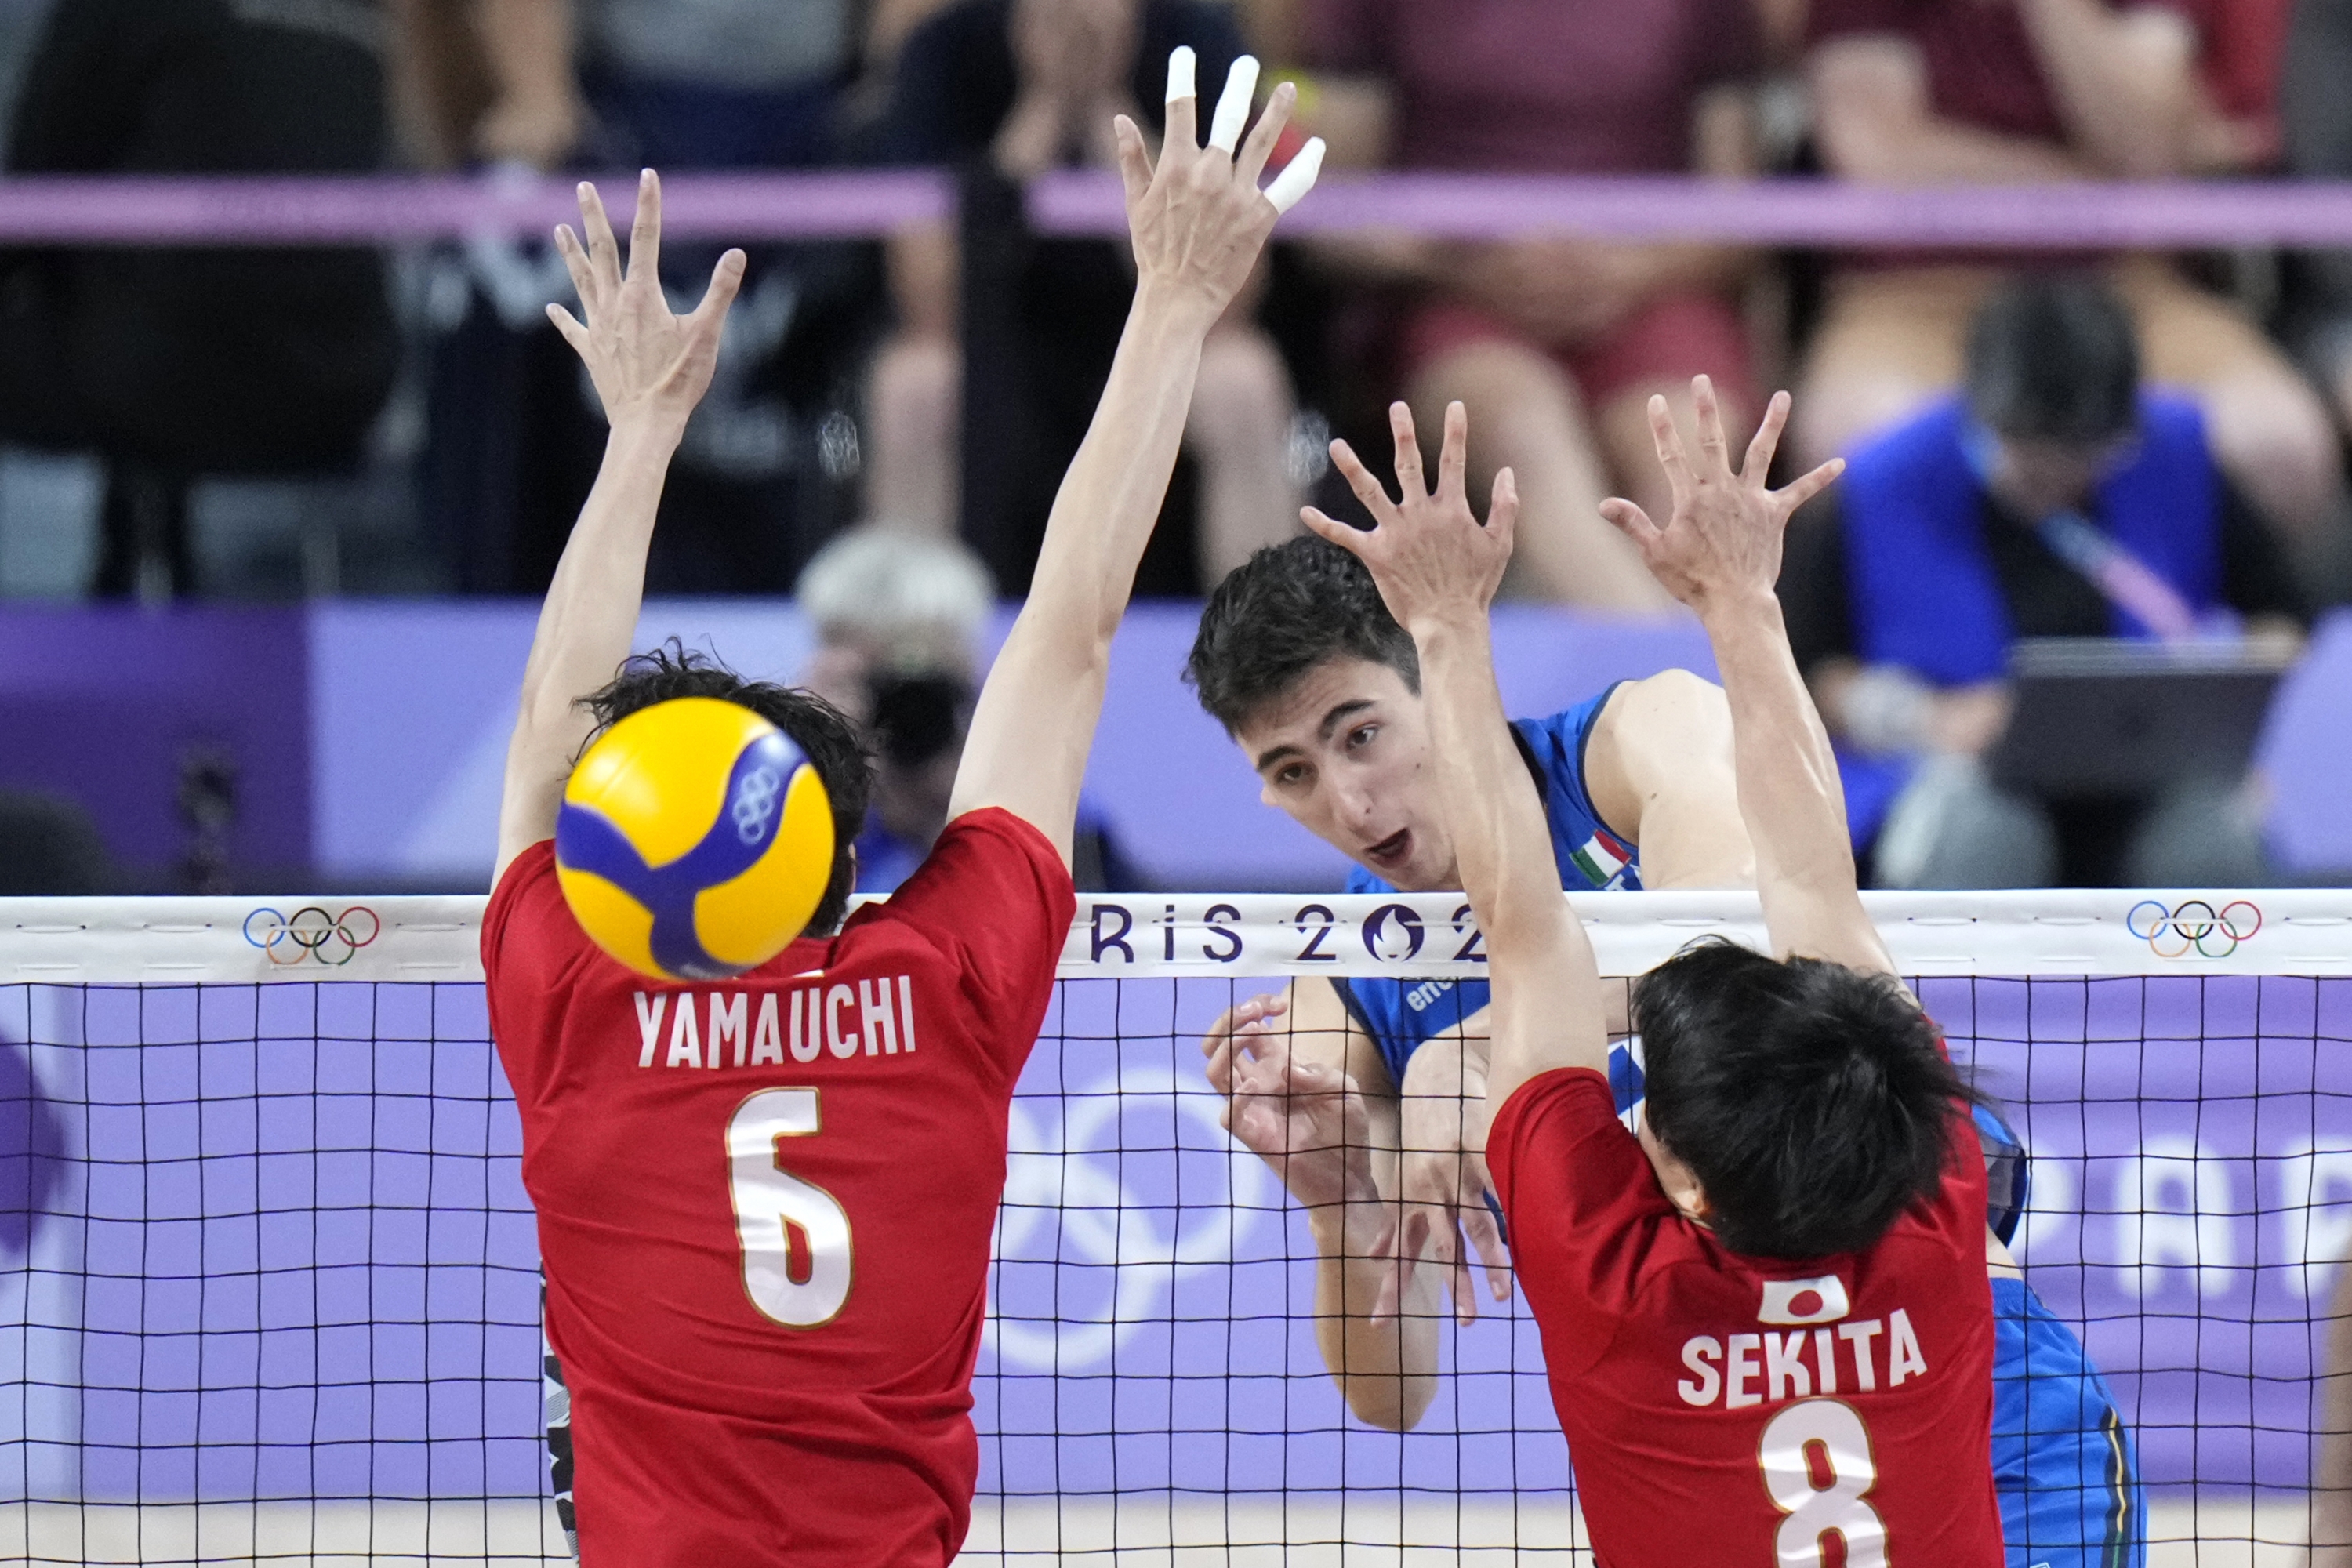 Simone Giannelli, of Italy, spikes a ball during a men's quarter final volleyball match between Italy and Japan at the 2024 Summer Olympics, Monday, Aug. 5, 2024, in Paris, France. (AP Photo/Alessandra Tarantino)